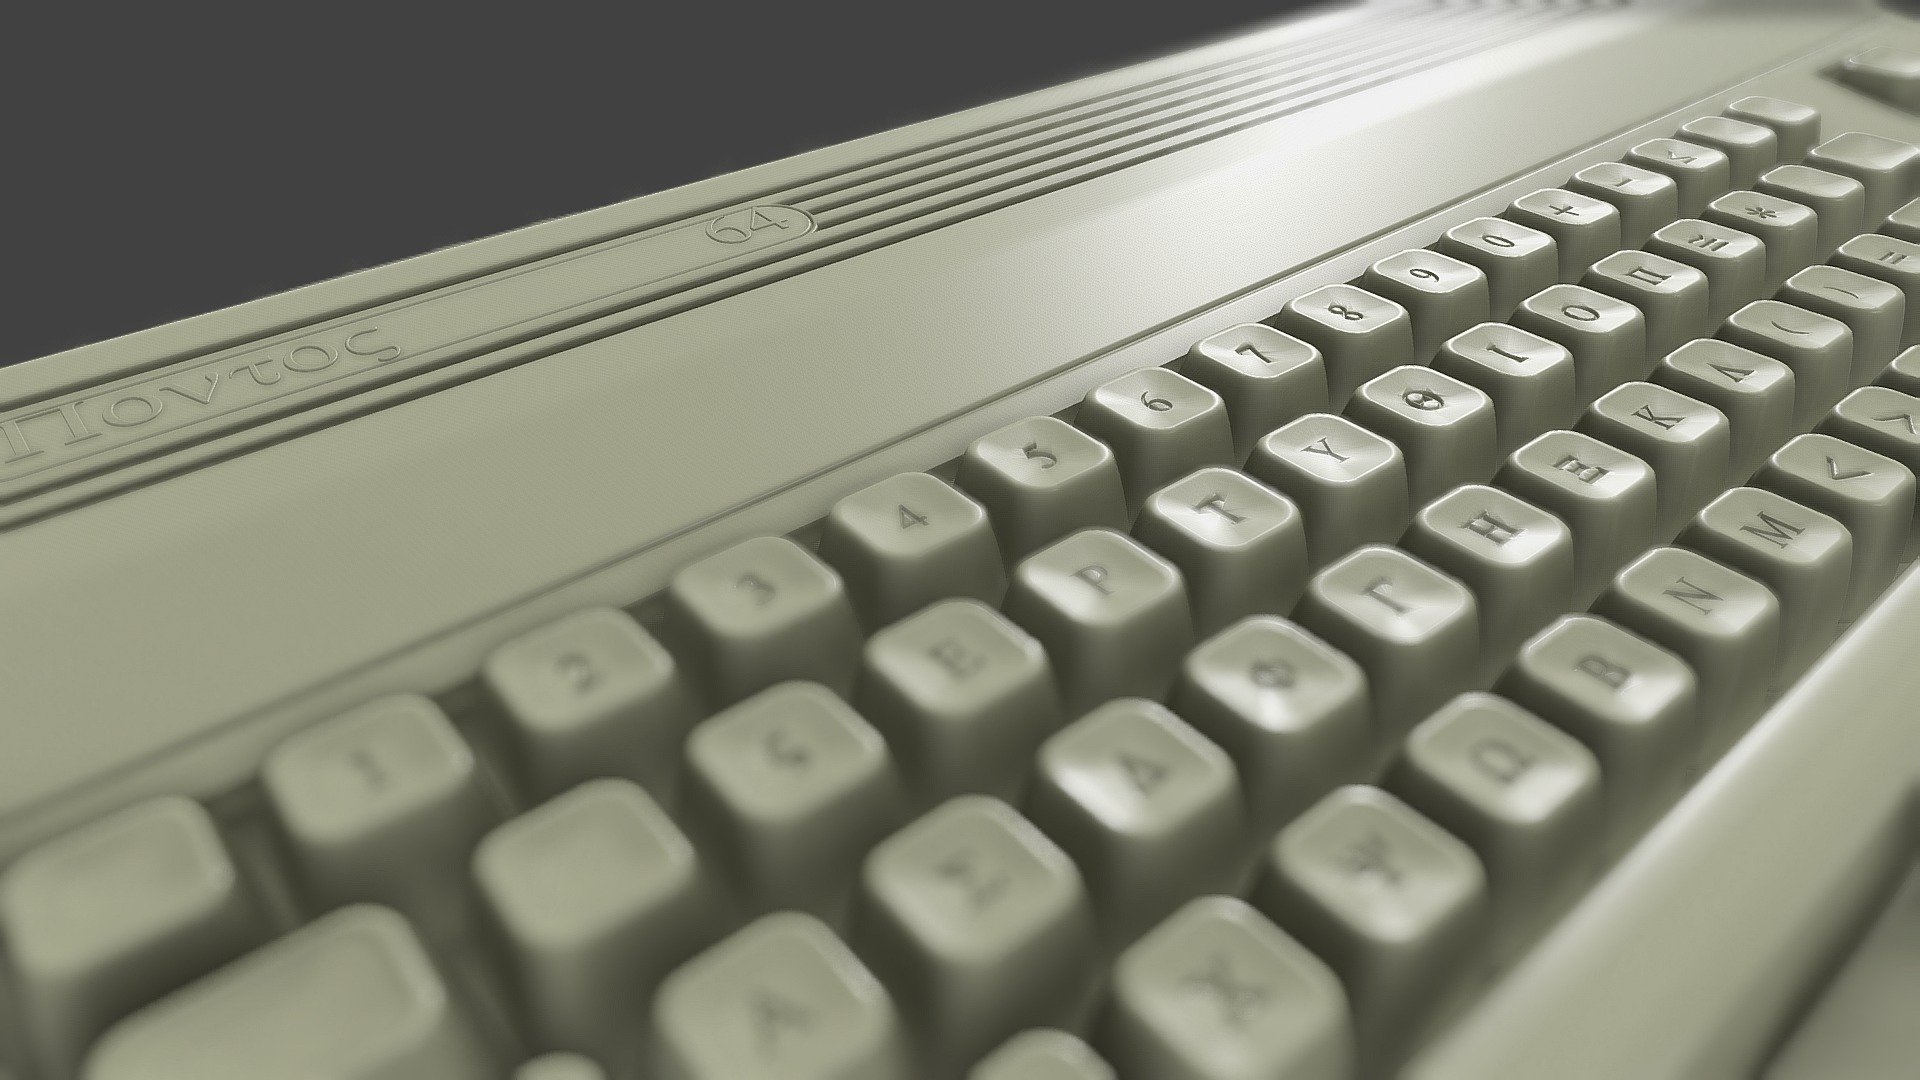 Greek computer based on C64.
Adding in the extra detailed parts.
Cosmetic changes, and upped the resolution.

high resolution model version 3d model